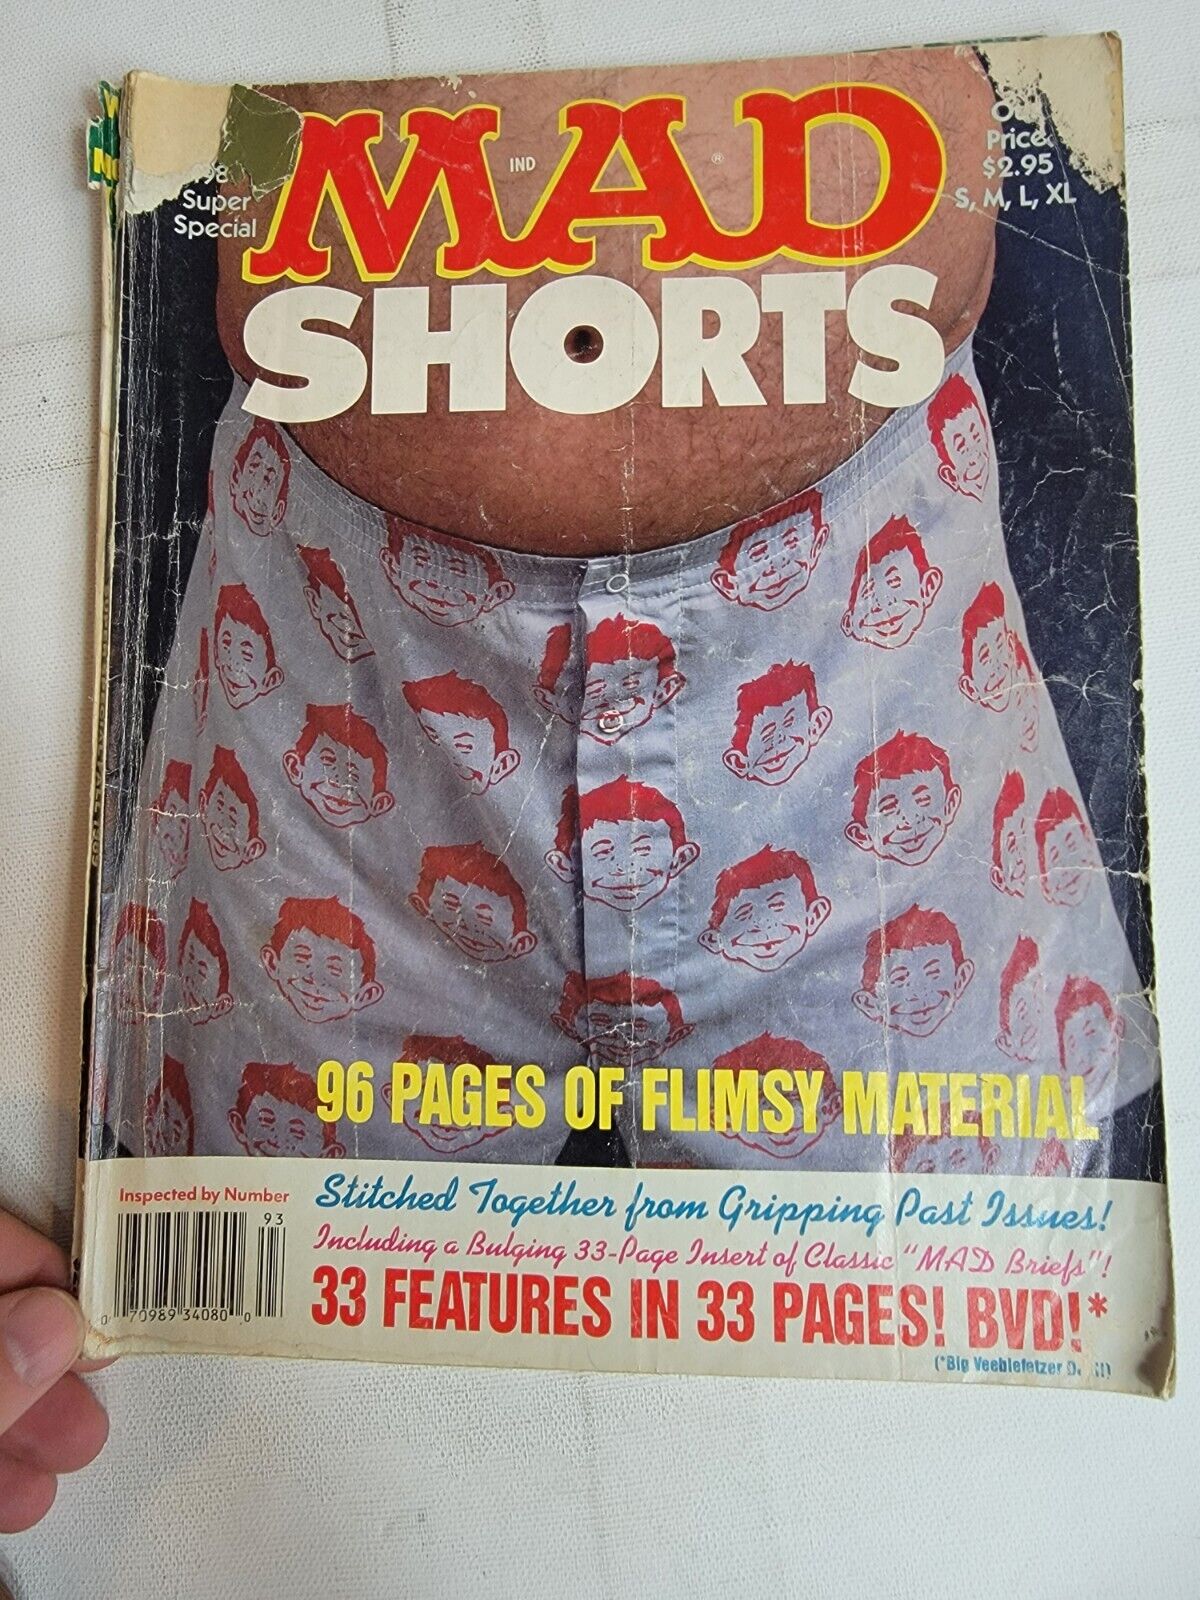 MAD SHORTS Magazine Fall 1989 Super Special Edition 1980s Vintage VTG #68